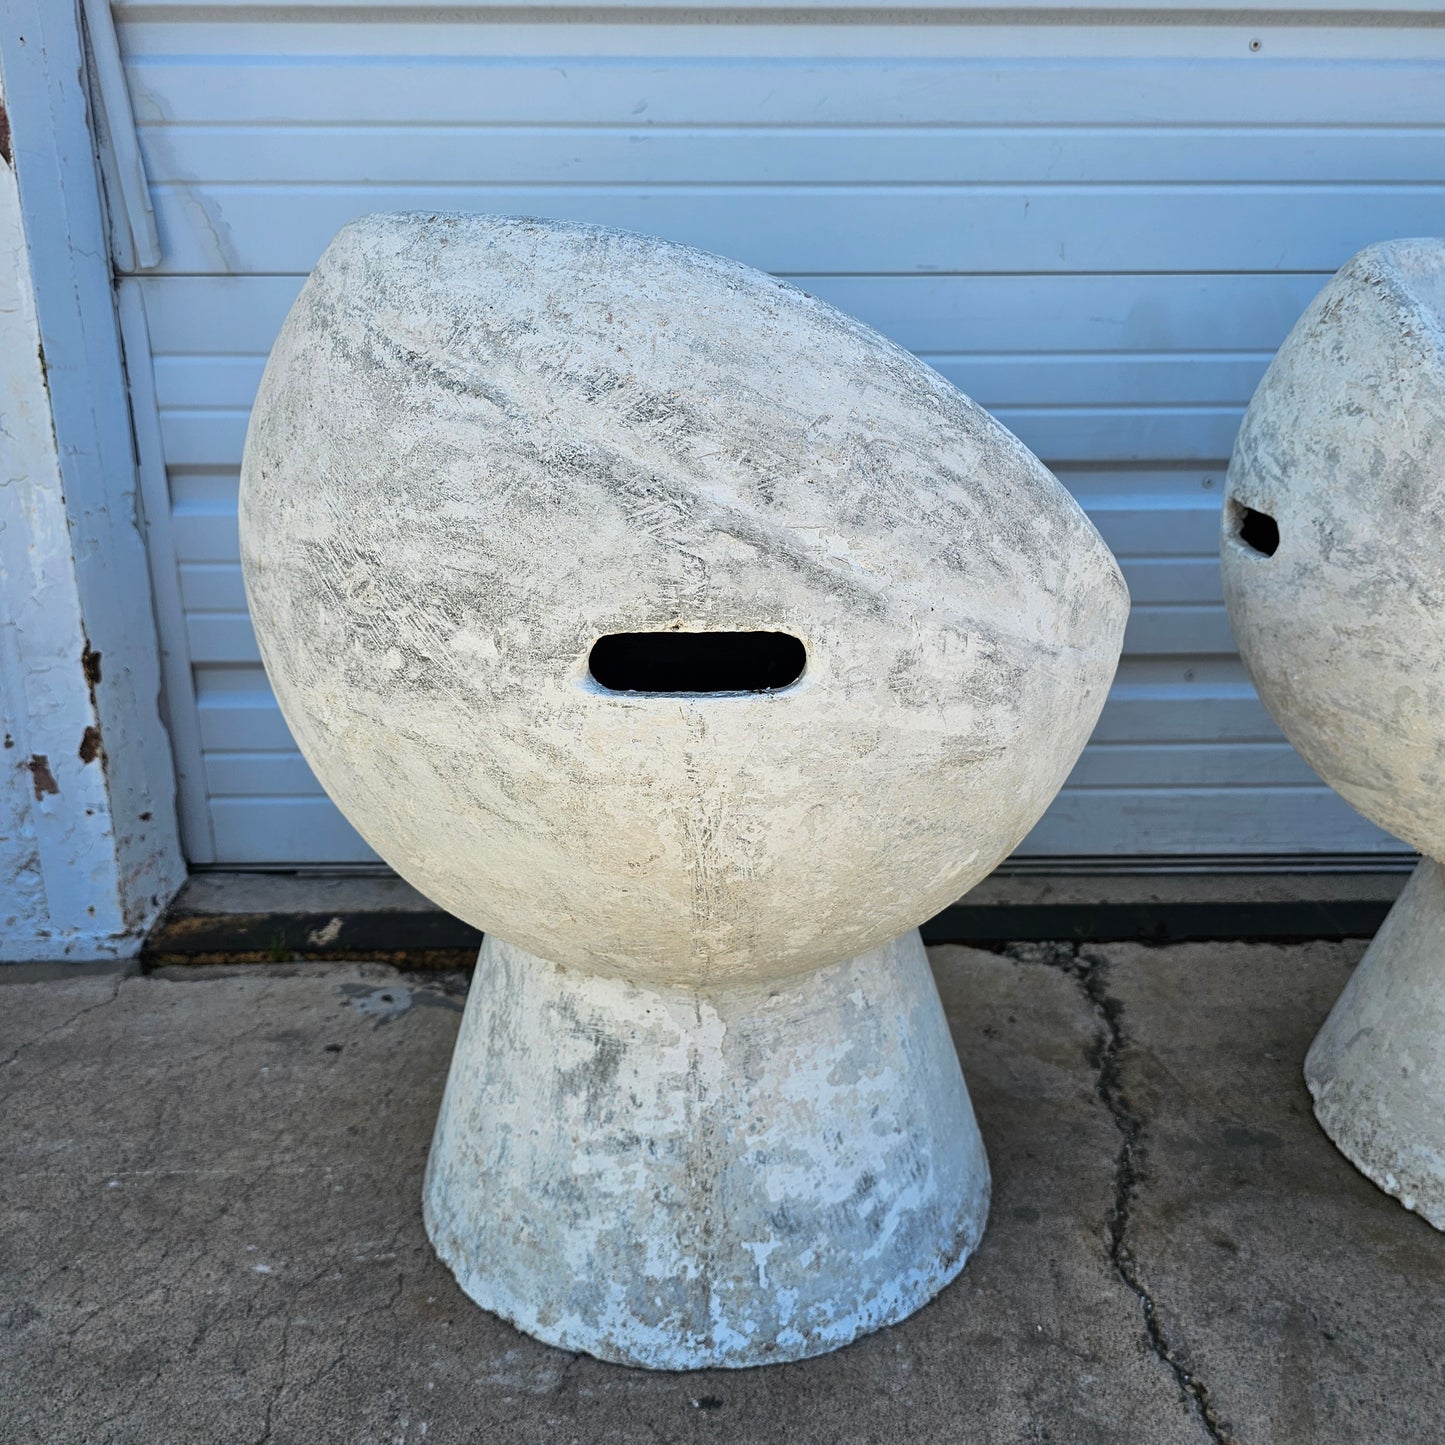 Pair of Willy Guhl Pod Chairs